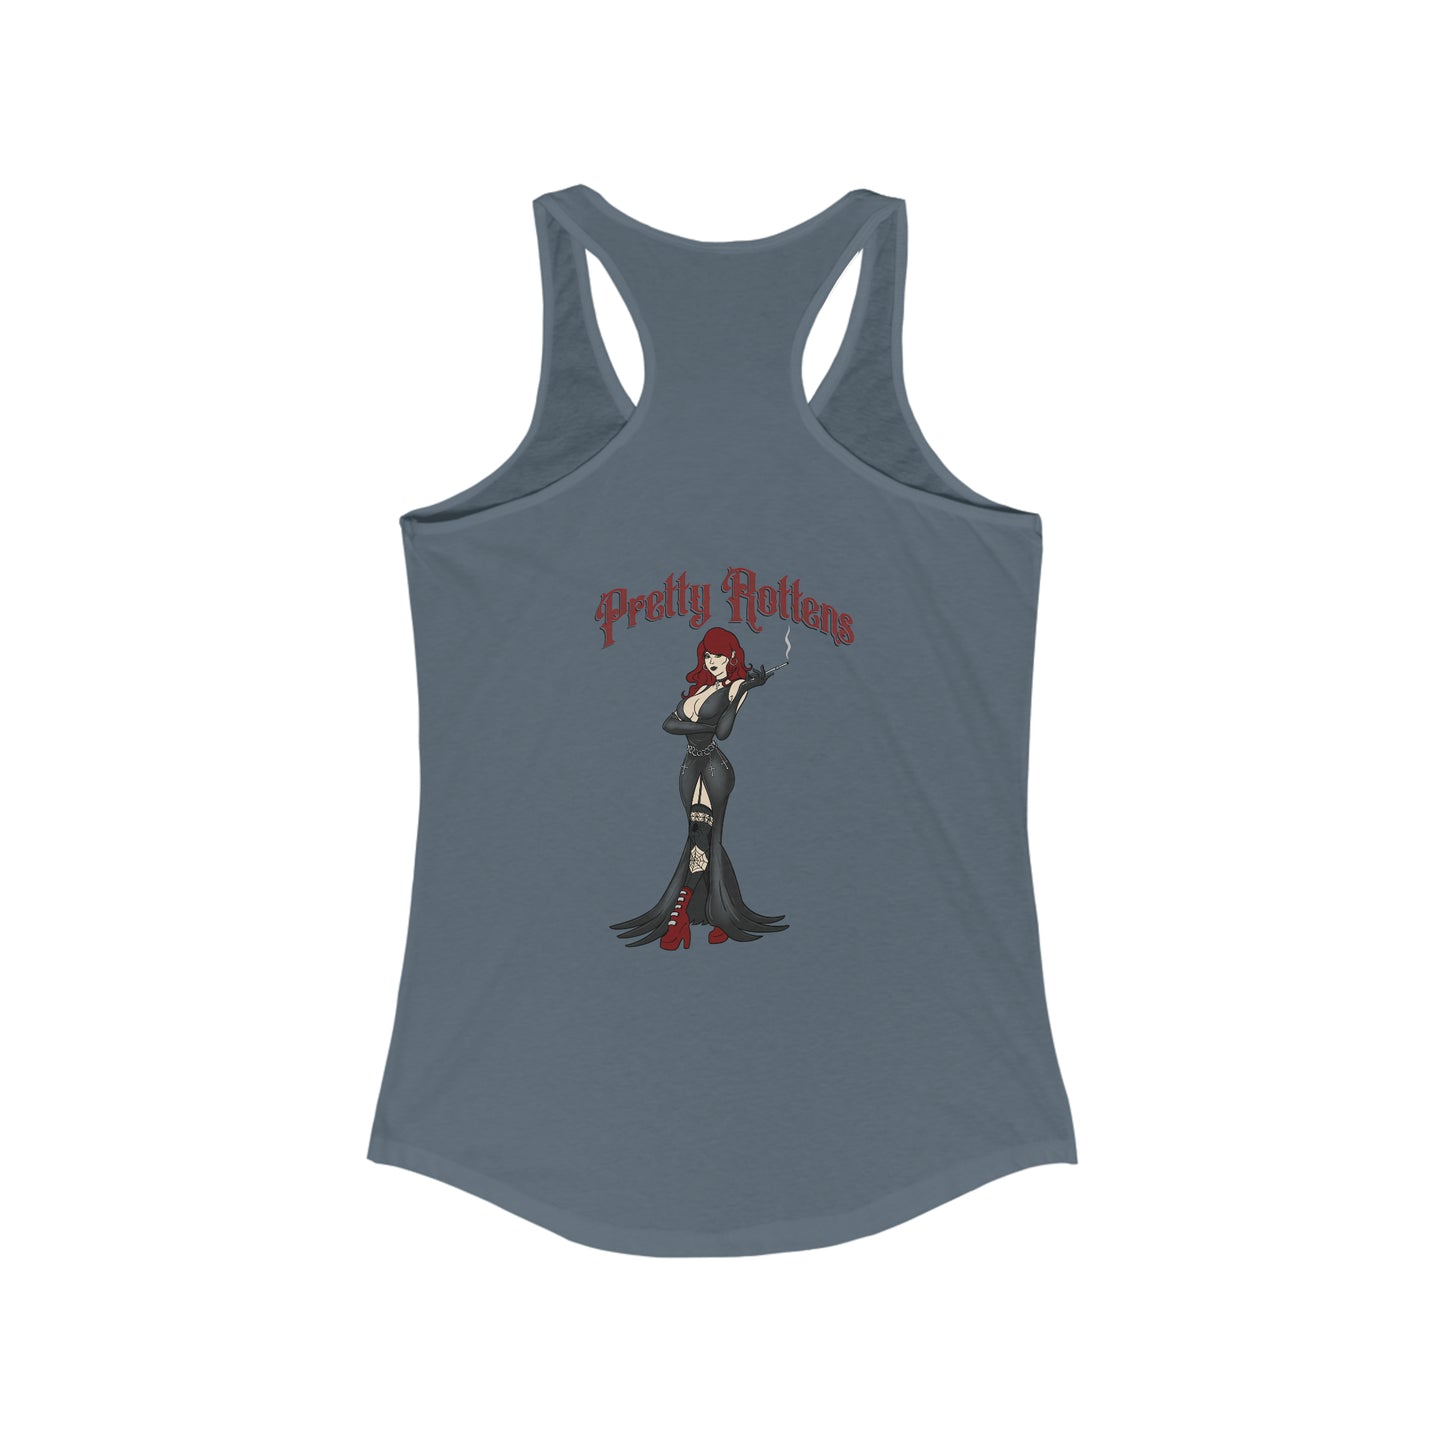 Women's Gothic Red and Black Pretty Dead Zombie Racerback Tank